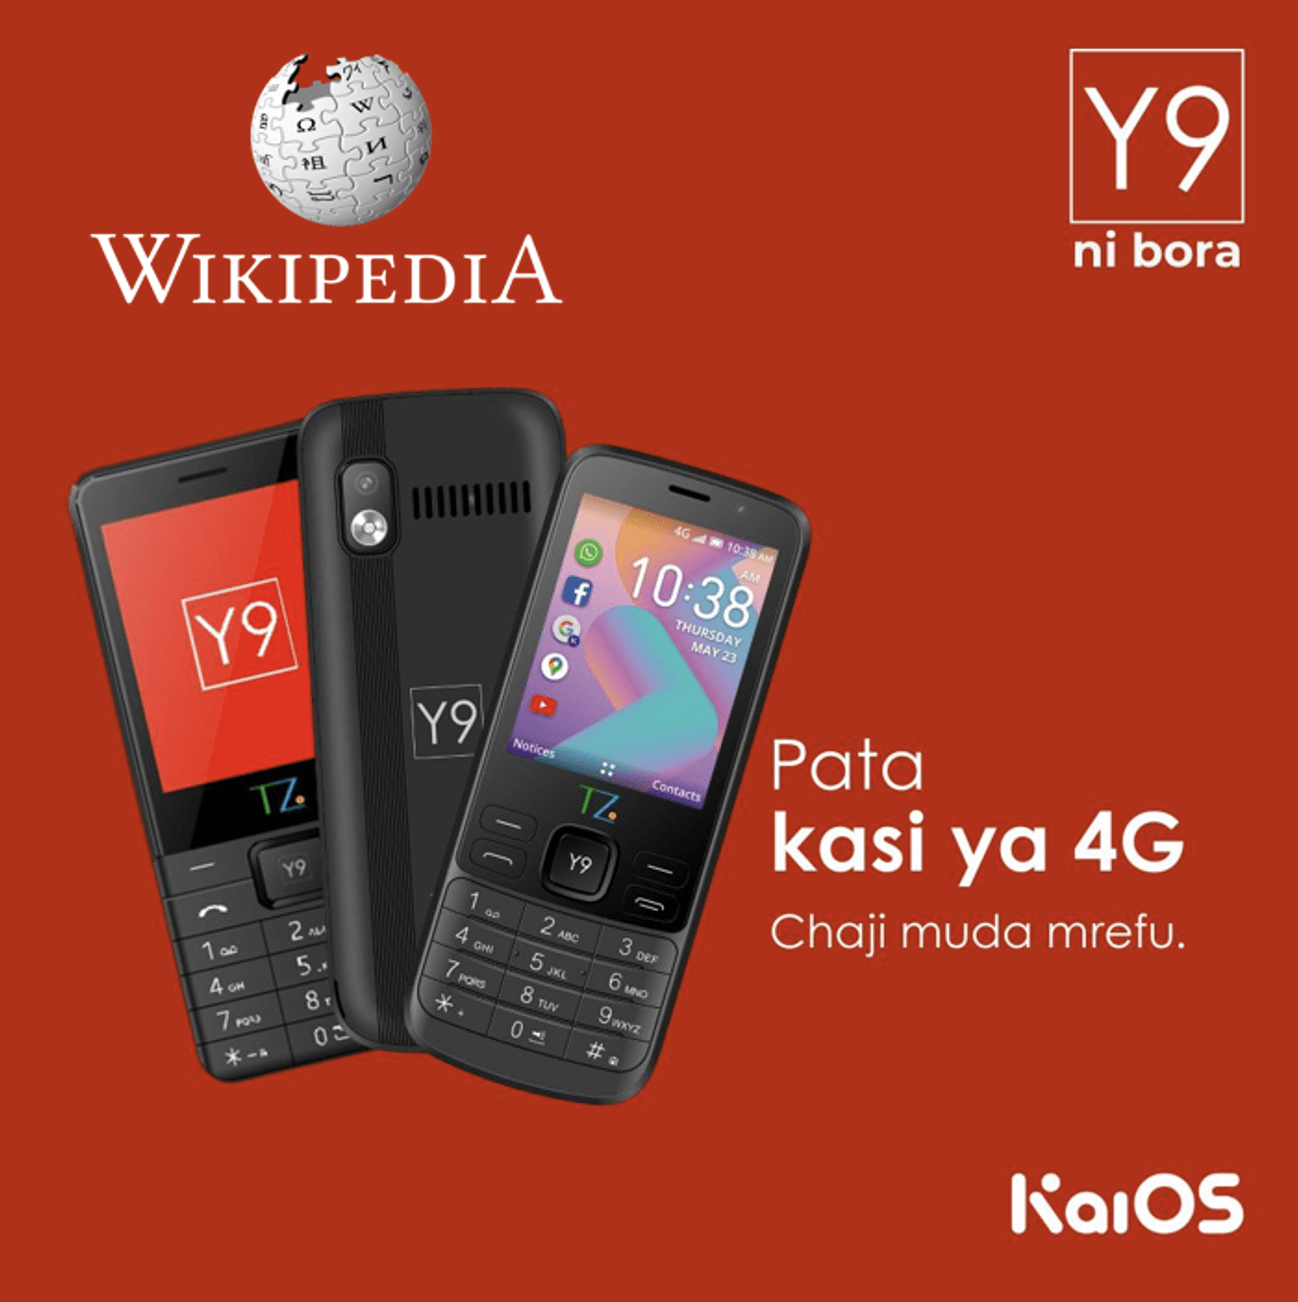 Wikipedia is available on the KaiOS, bringing a wealth of knowledge right to your fingertips.